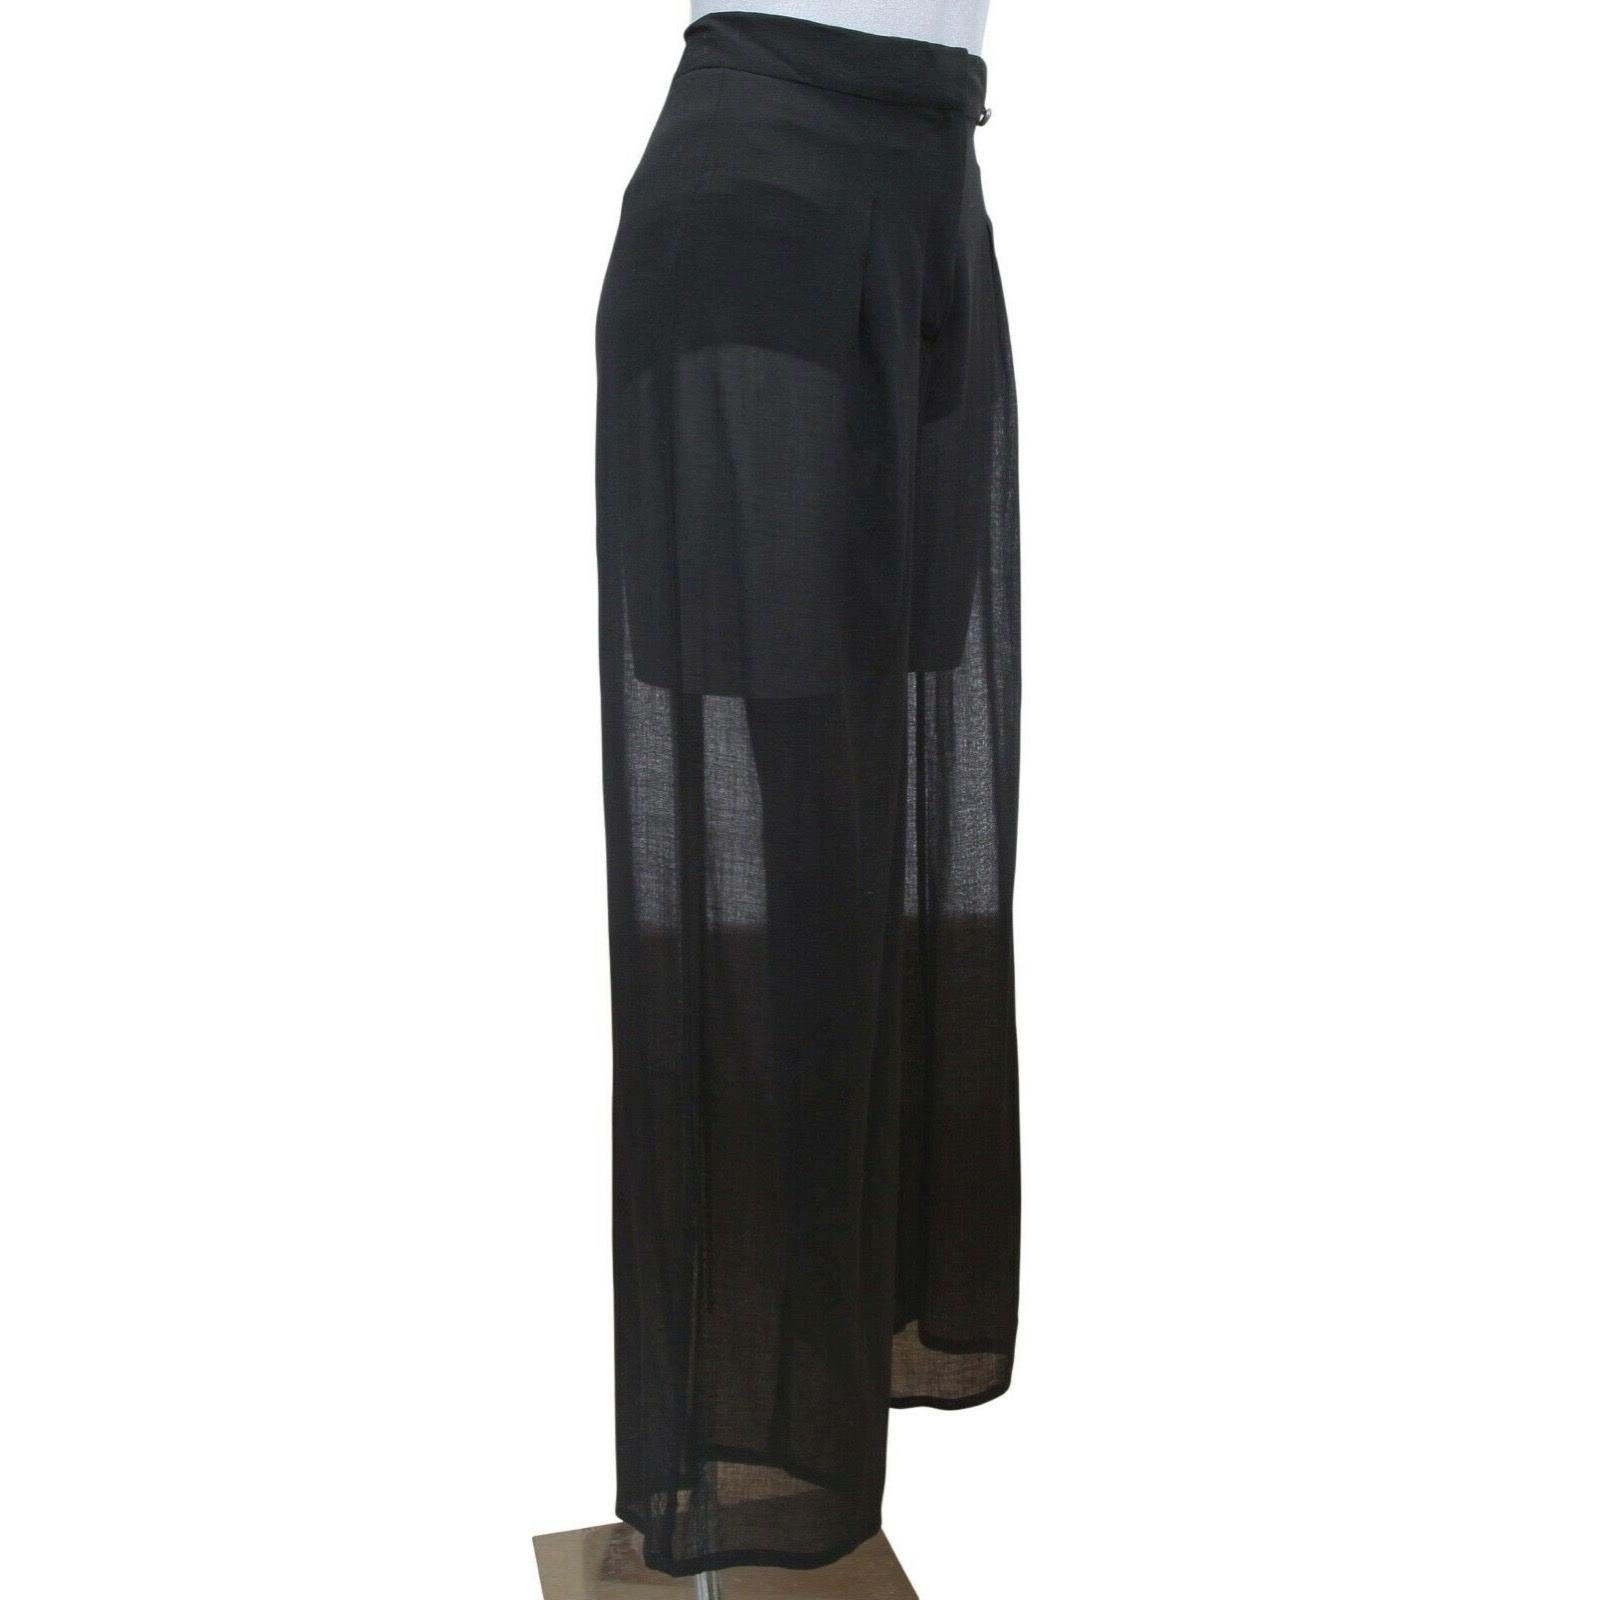 GUARANTEED AUTHENTIC CHANEL BLACK SEMI-SHEER EVENING WIDE LEG PANT

Details:
• Black wool blend pant.
• High rise.
• Wide leg.
• Lightweight, sheer at tight to hem area.
• Black CC plaque at left waist.
• Front concealed zipper with hook-n-eye and